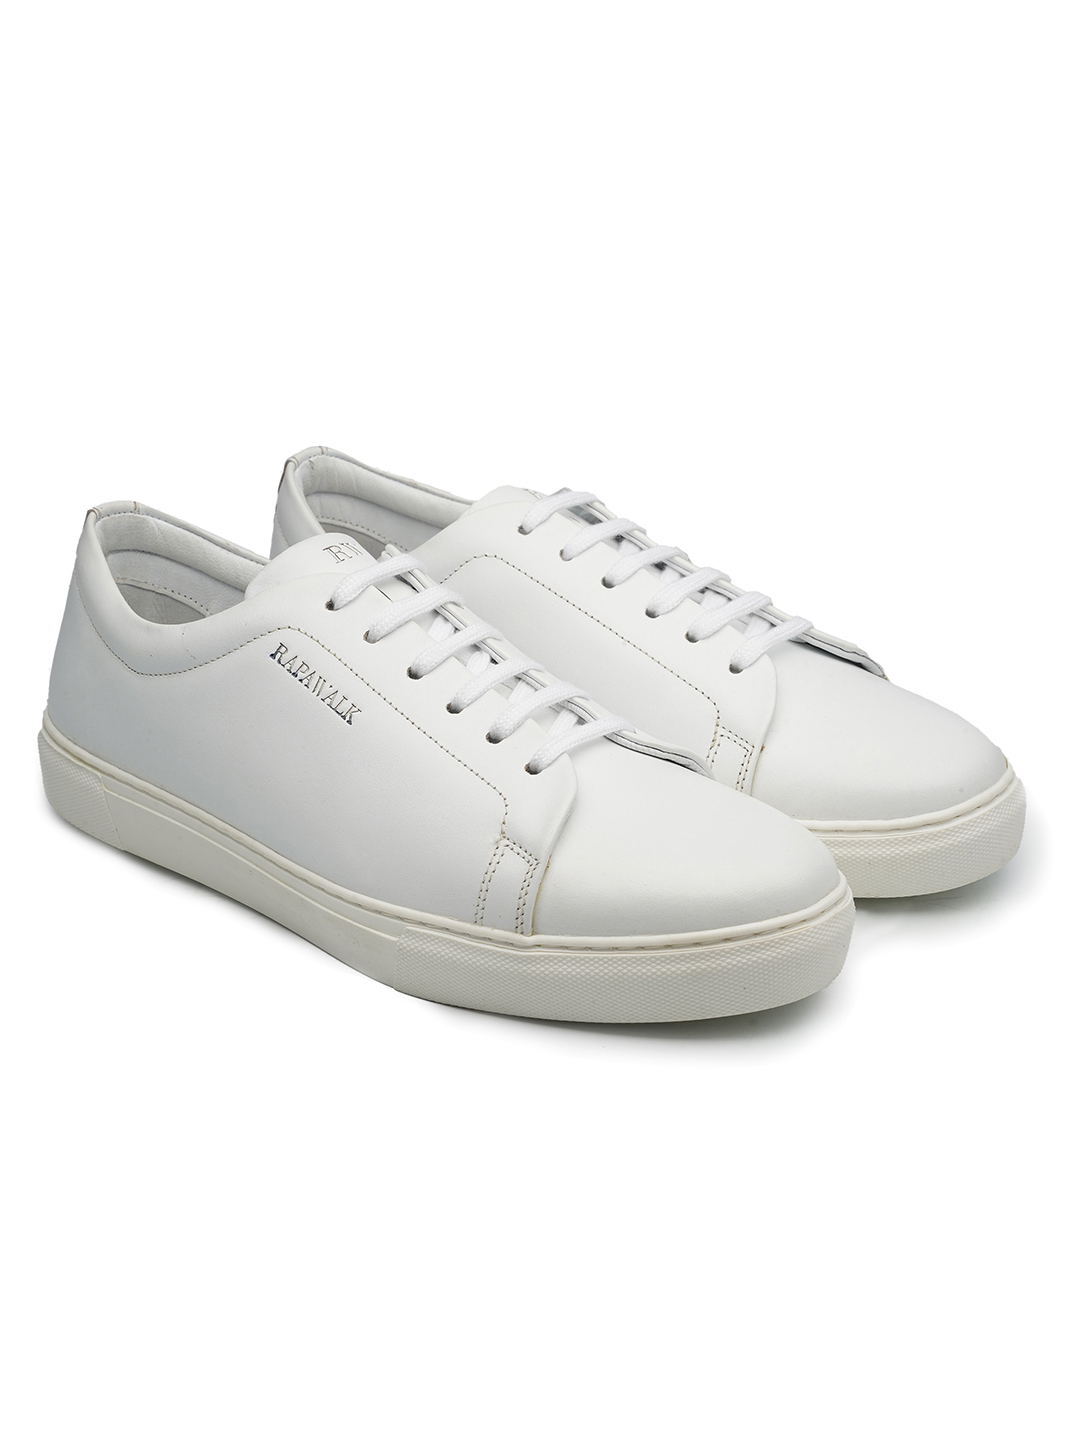 Gucci Full Leather White Men's Sneaker Shoes at Rs 10999/pair in New Delhi  | ID: 2851885345930